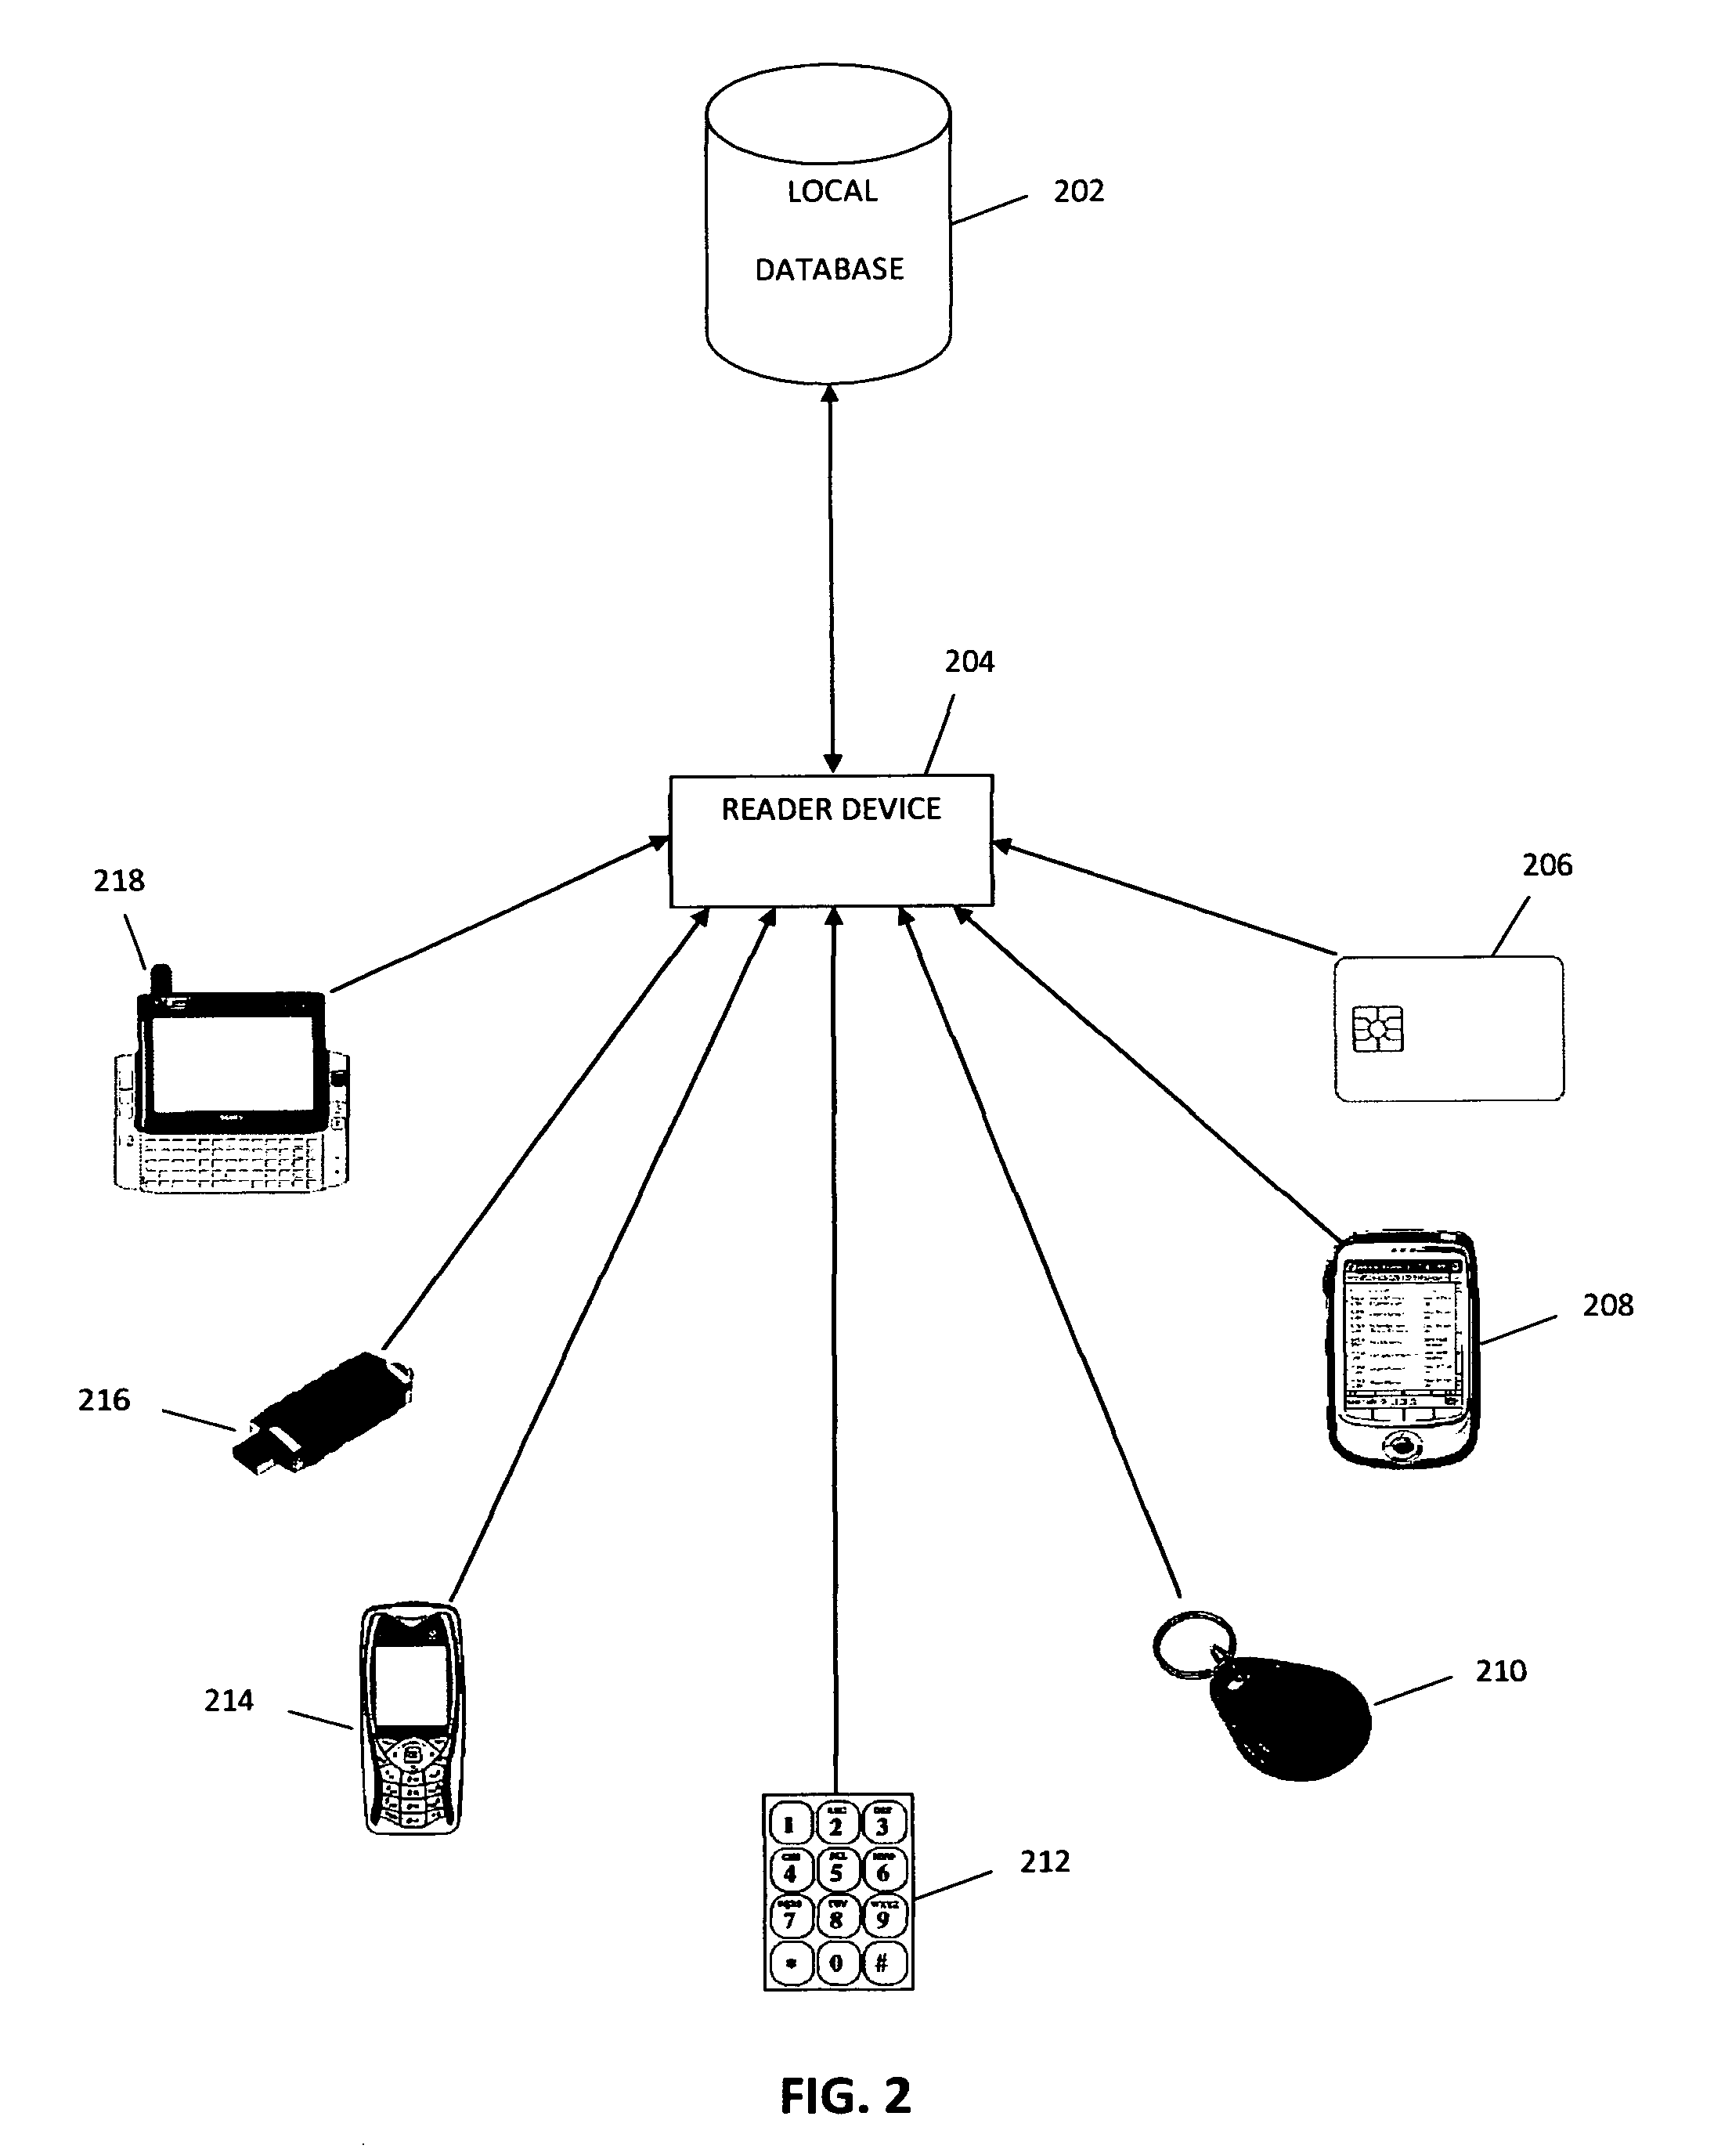 Method to provide authentication using a universal identifier